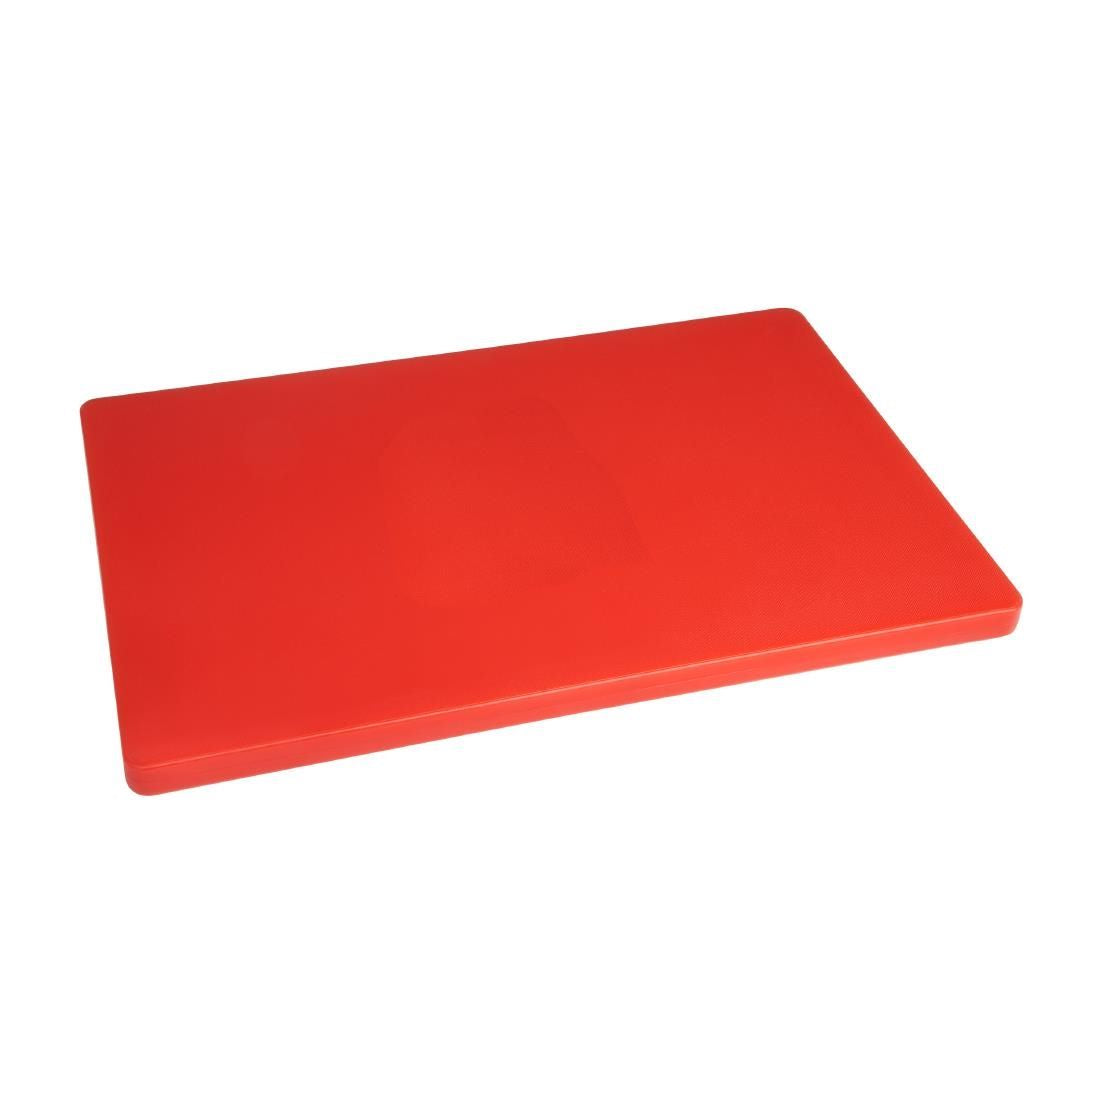 Hygiplas Extra Thick Low Density Red Chopping Board Large JD Catering Equipment Solutions Ltd